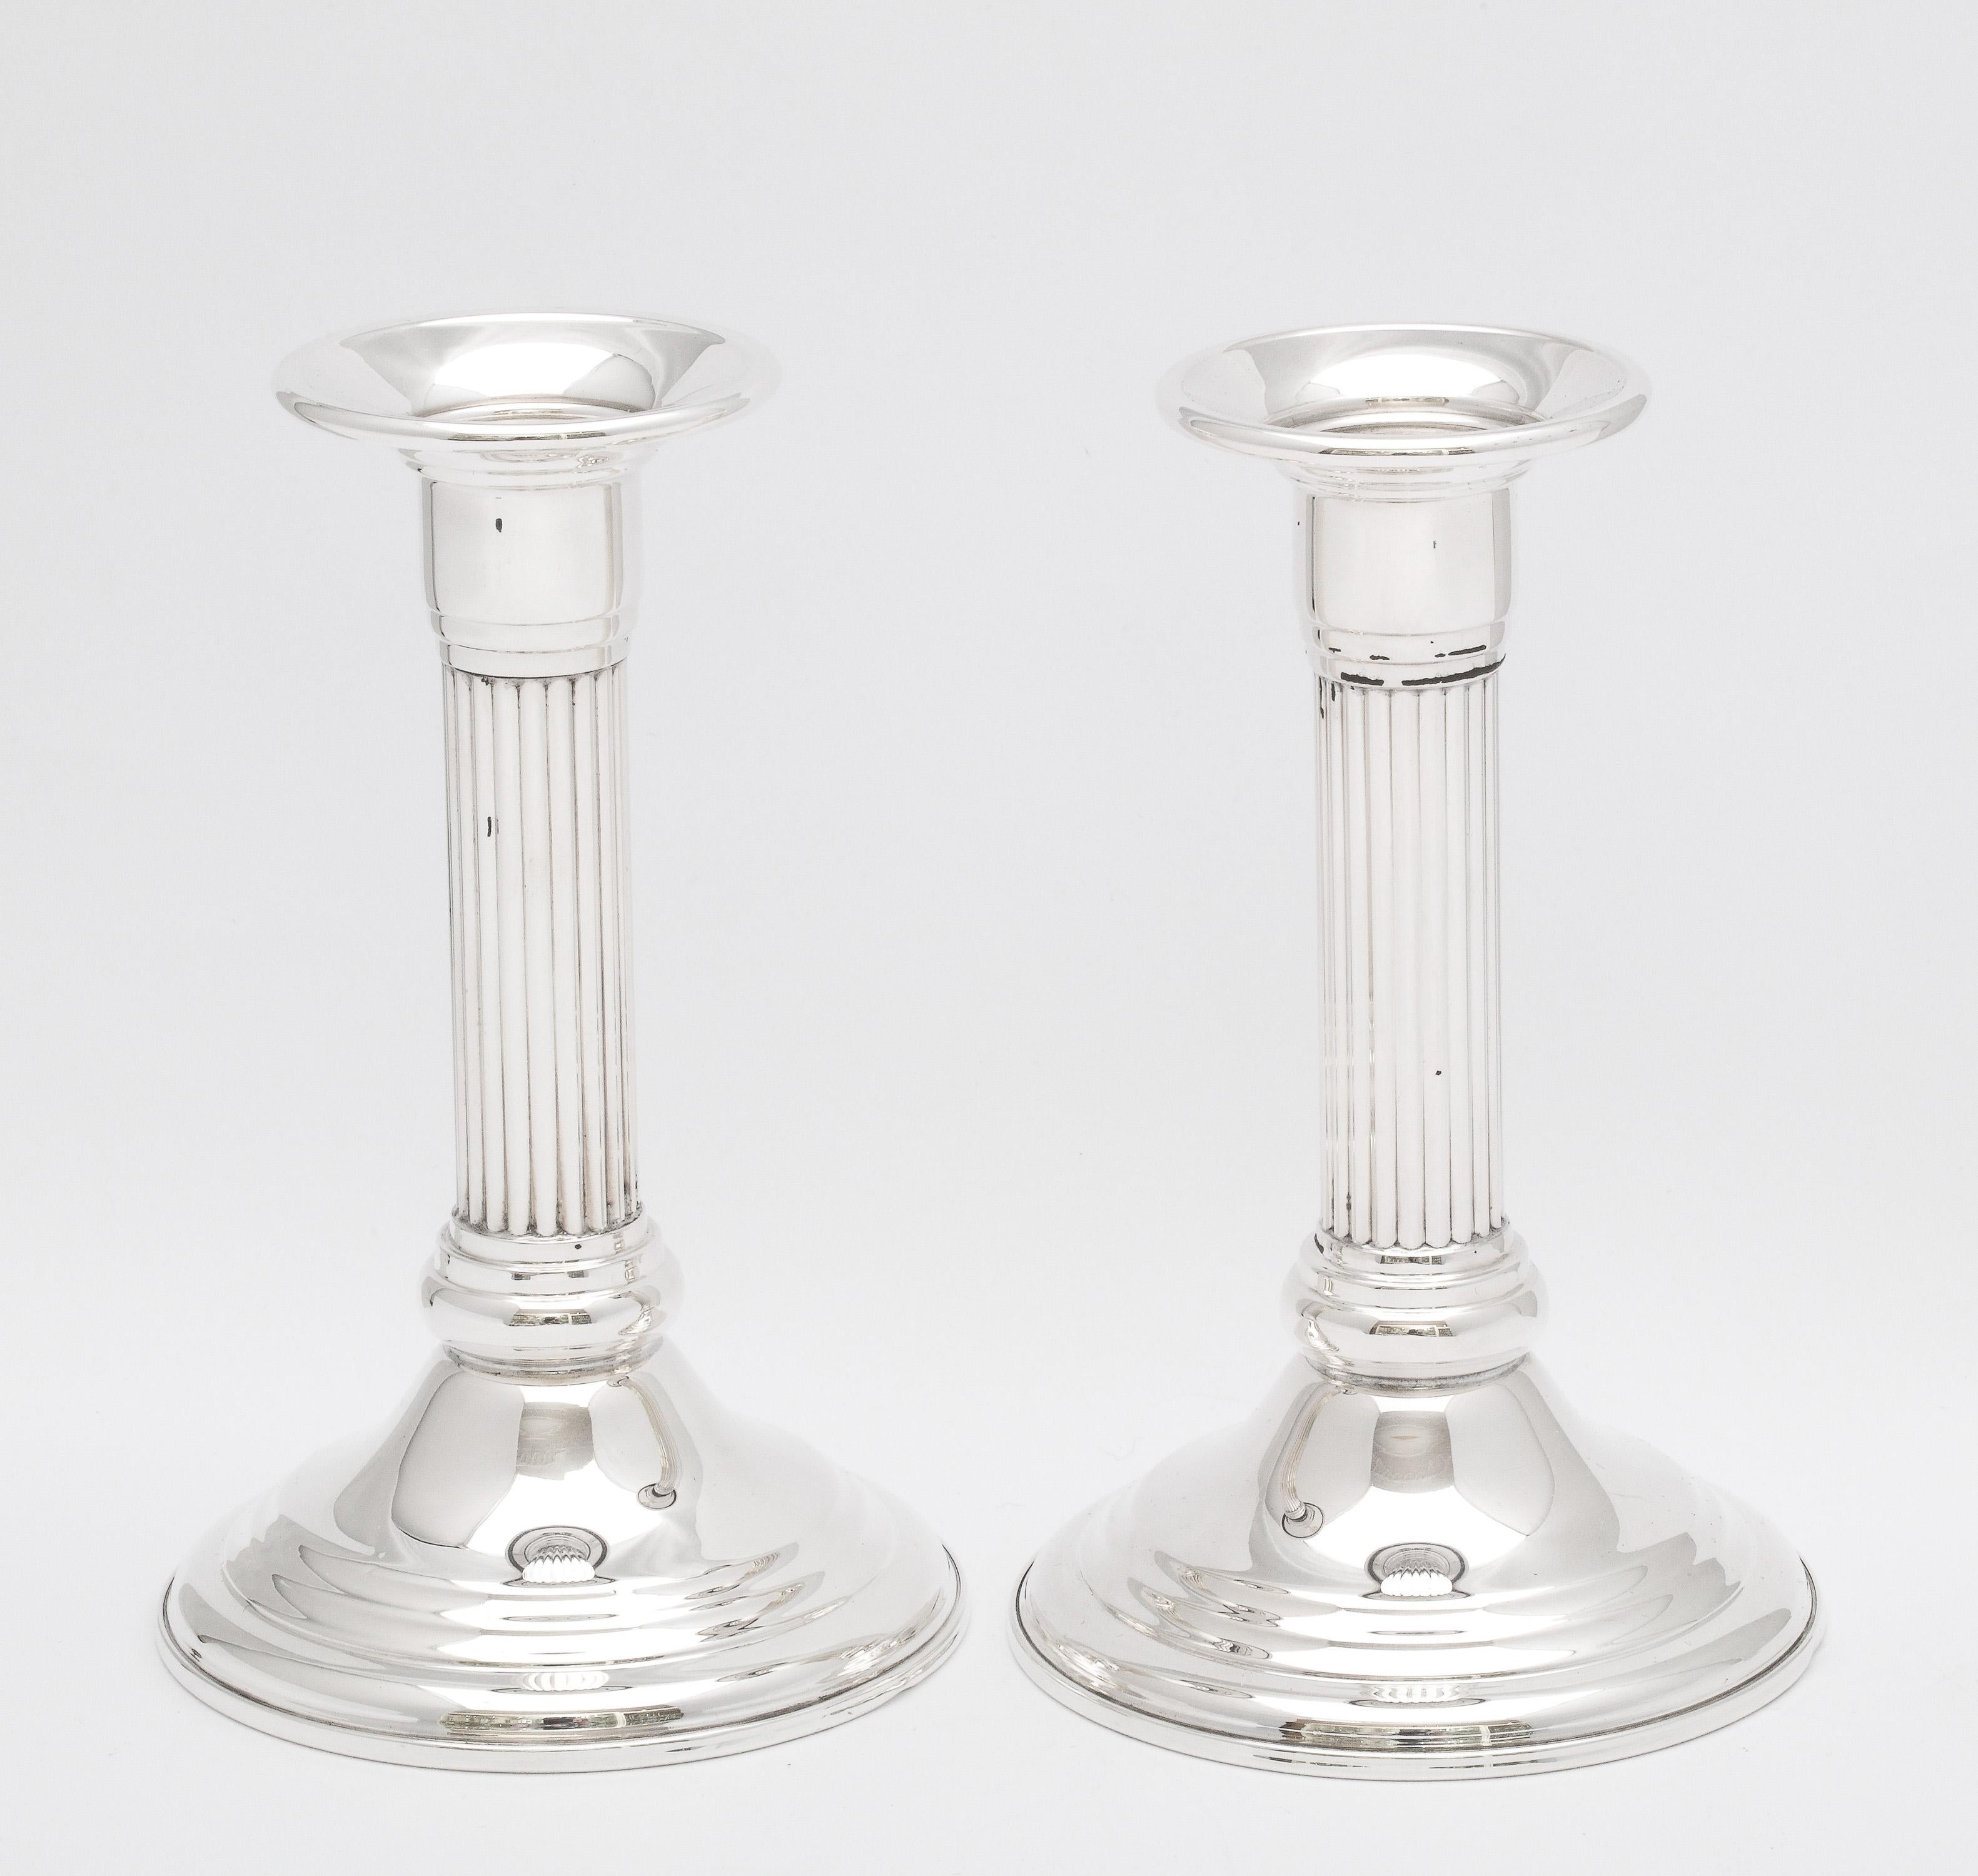 Pair of Mid-Century Neoclassical-Style Sterling Silver Column-Form Candlesticks 1